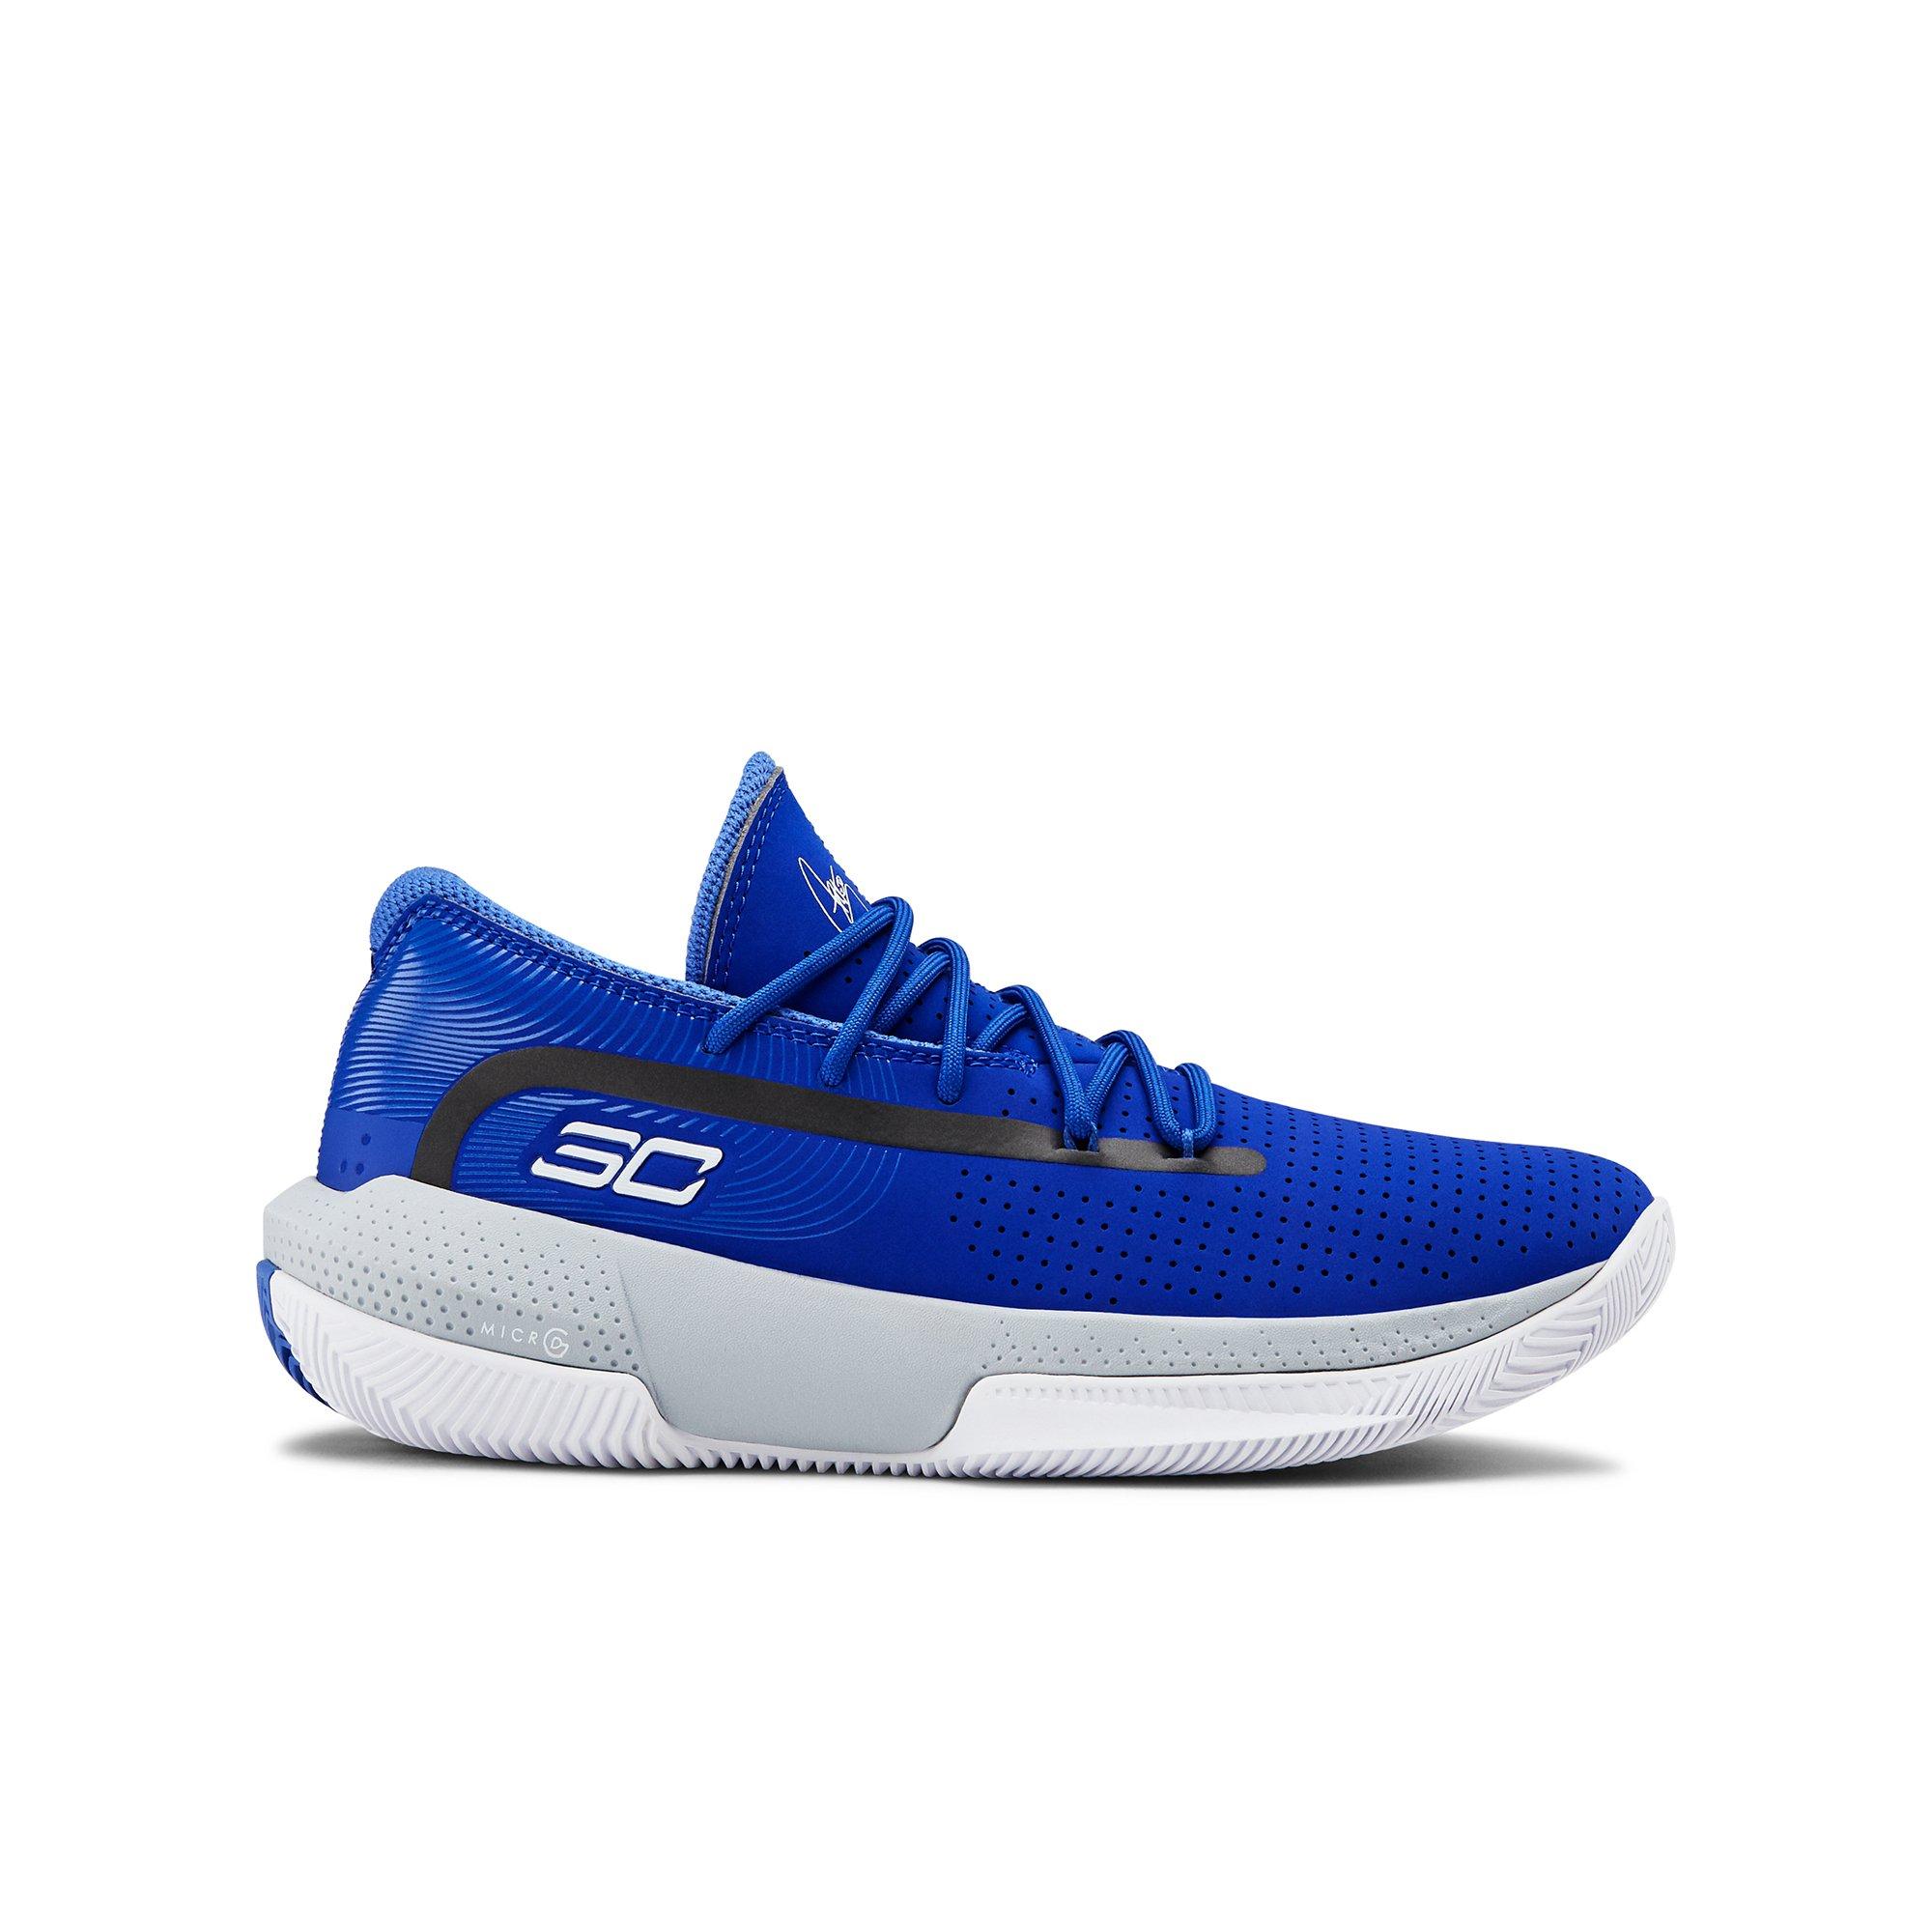 stephen curry basketball shoes 2019